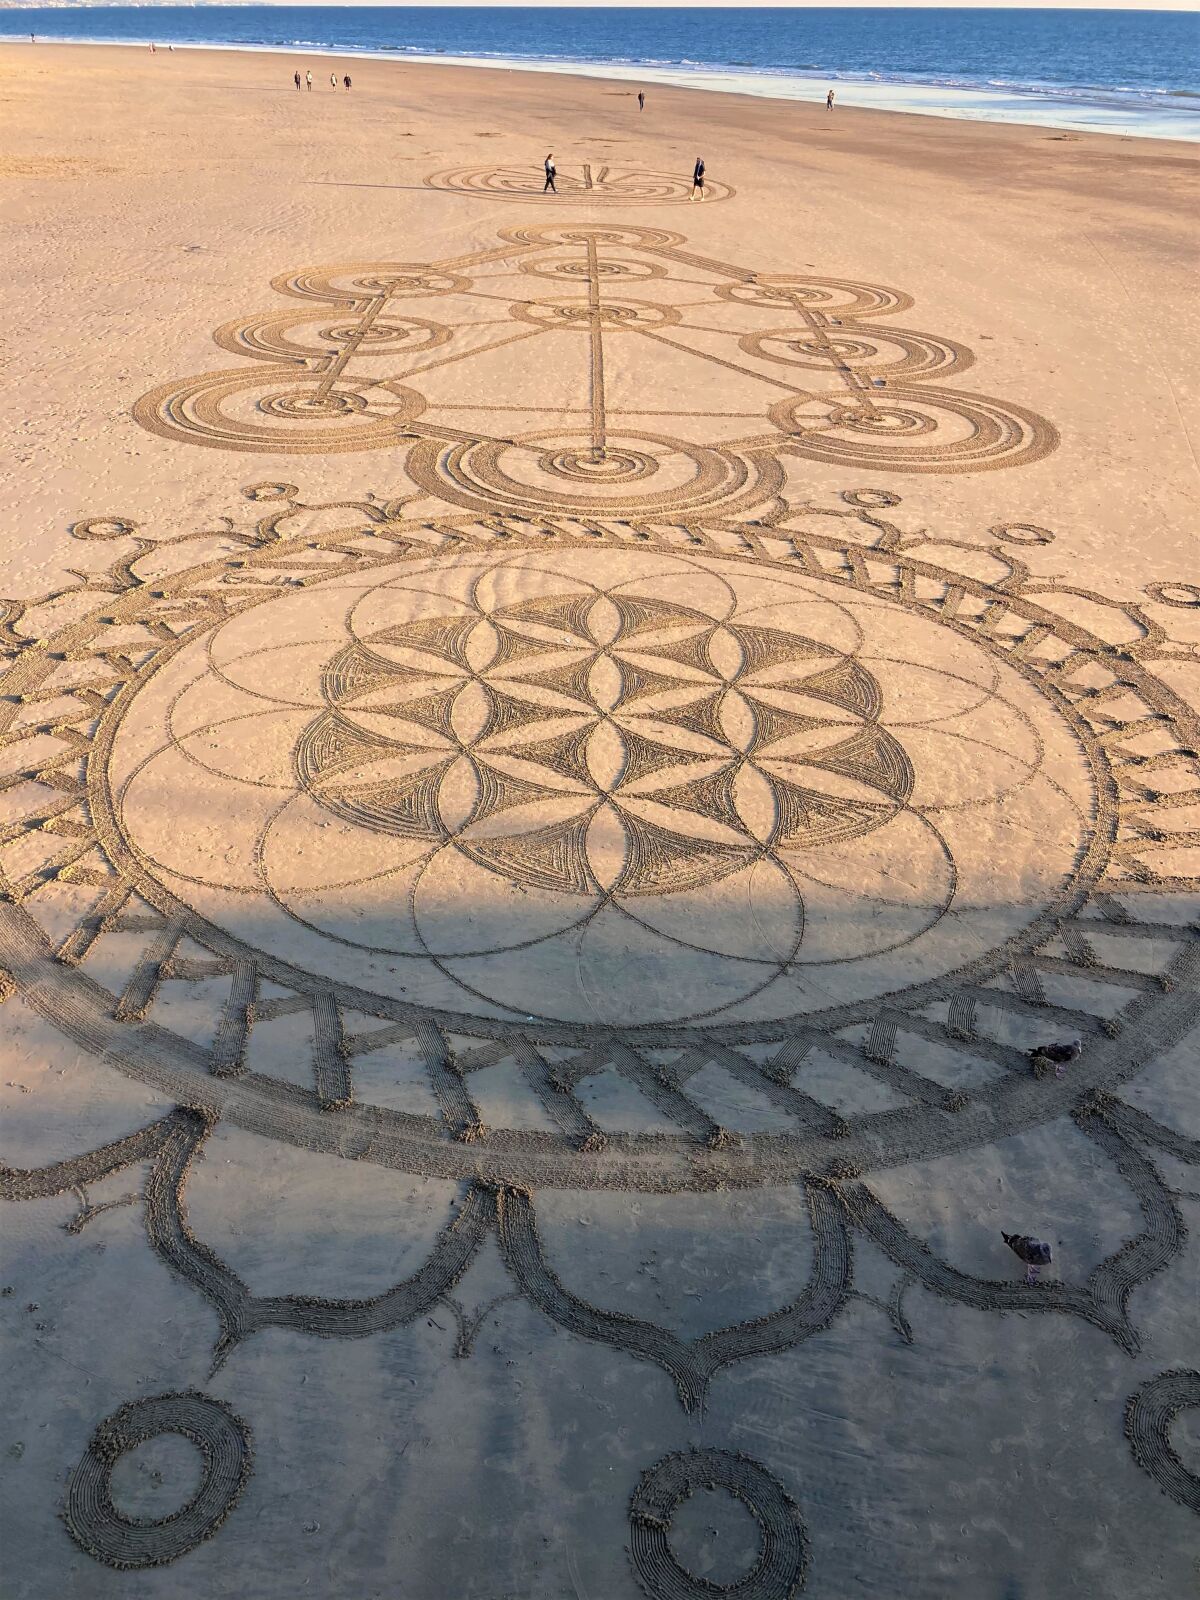 A recent geometric sand etching at Newport Beach, created by local artists Shane Kern and Drew Davis, the Low Tide Aliens.